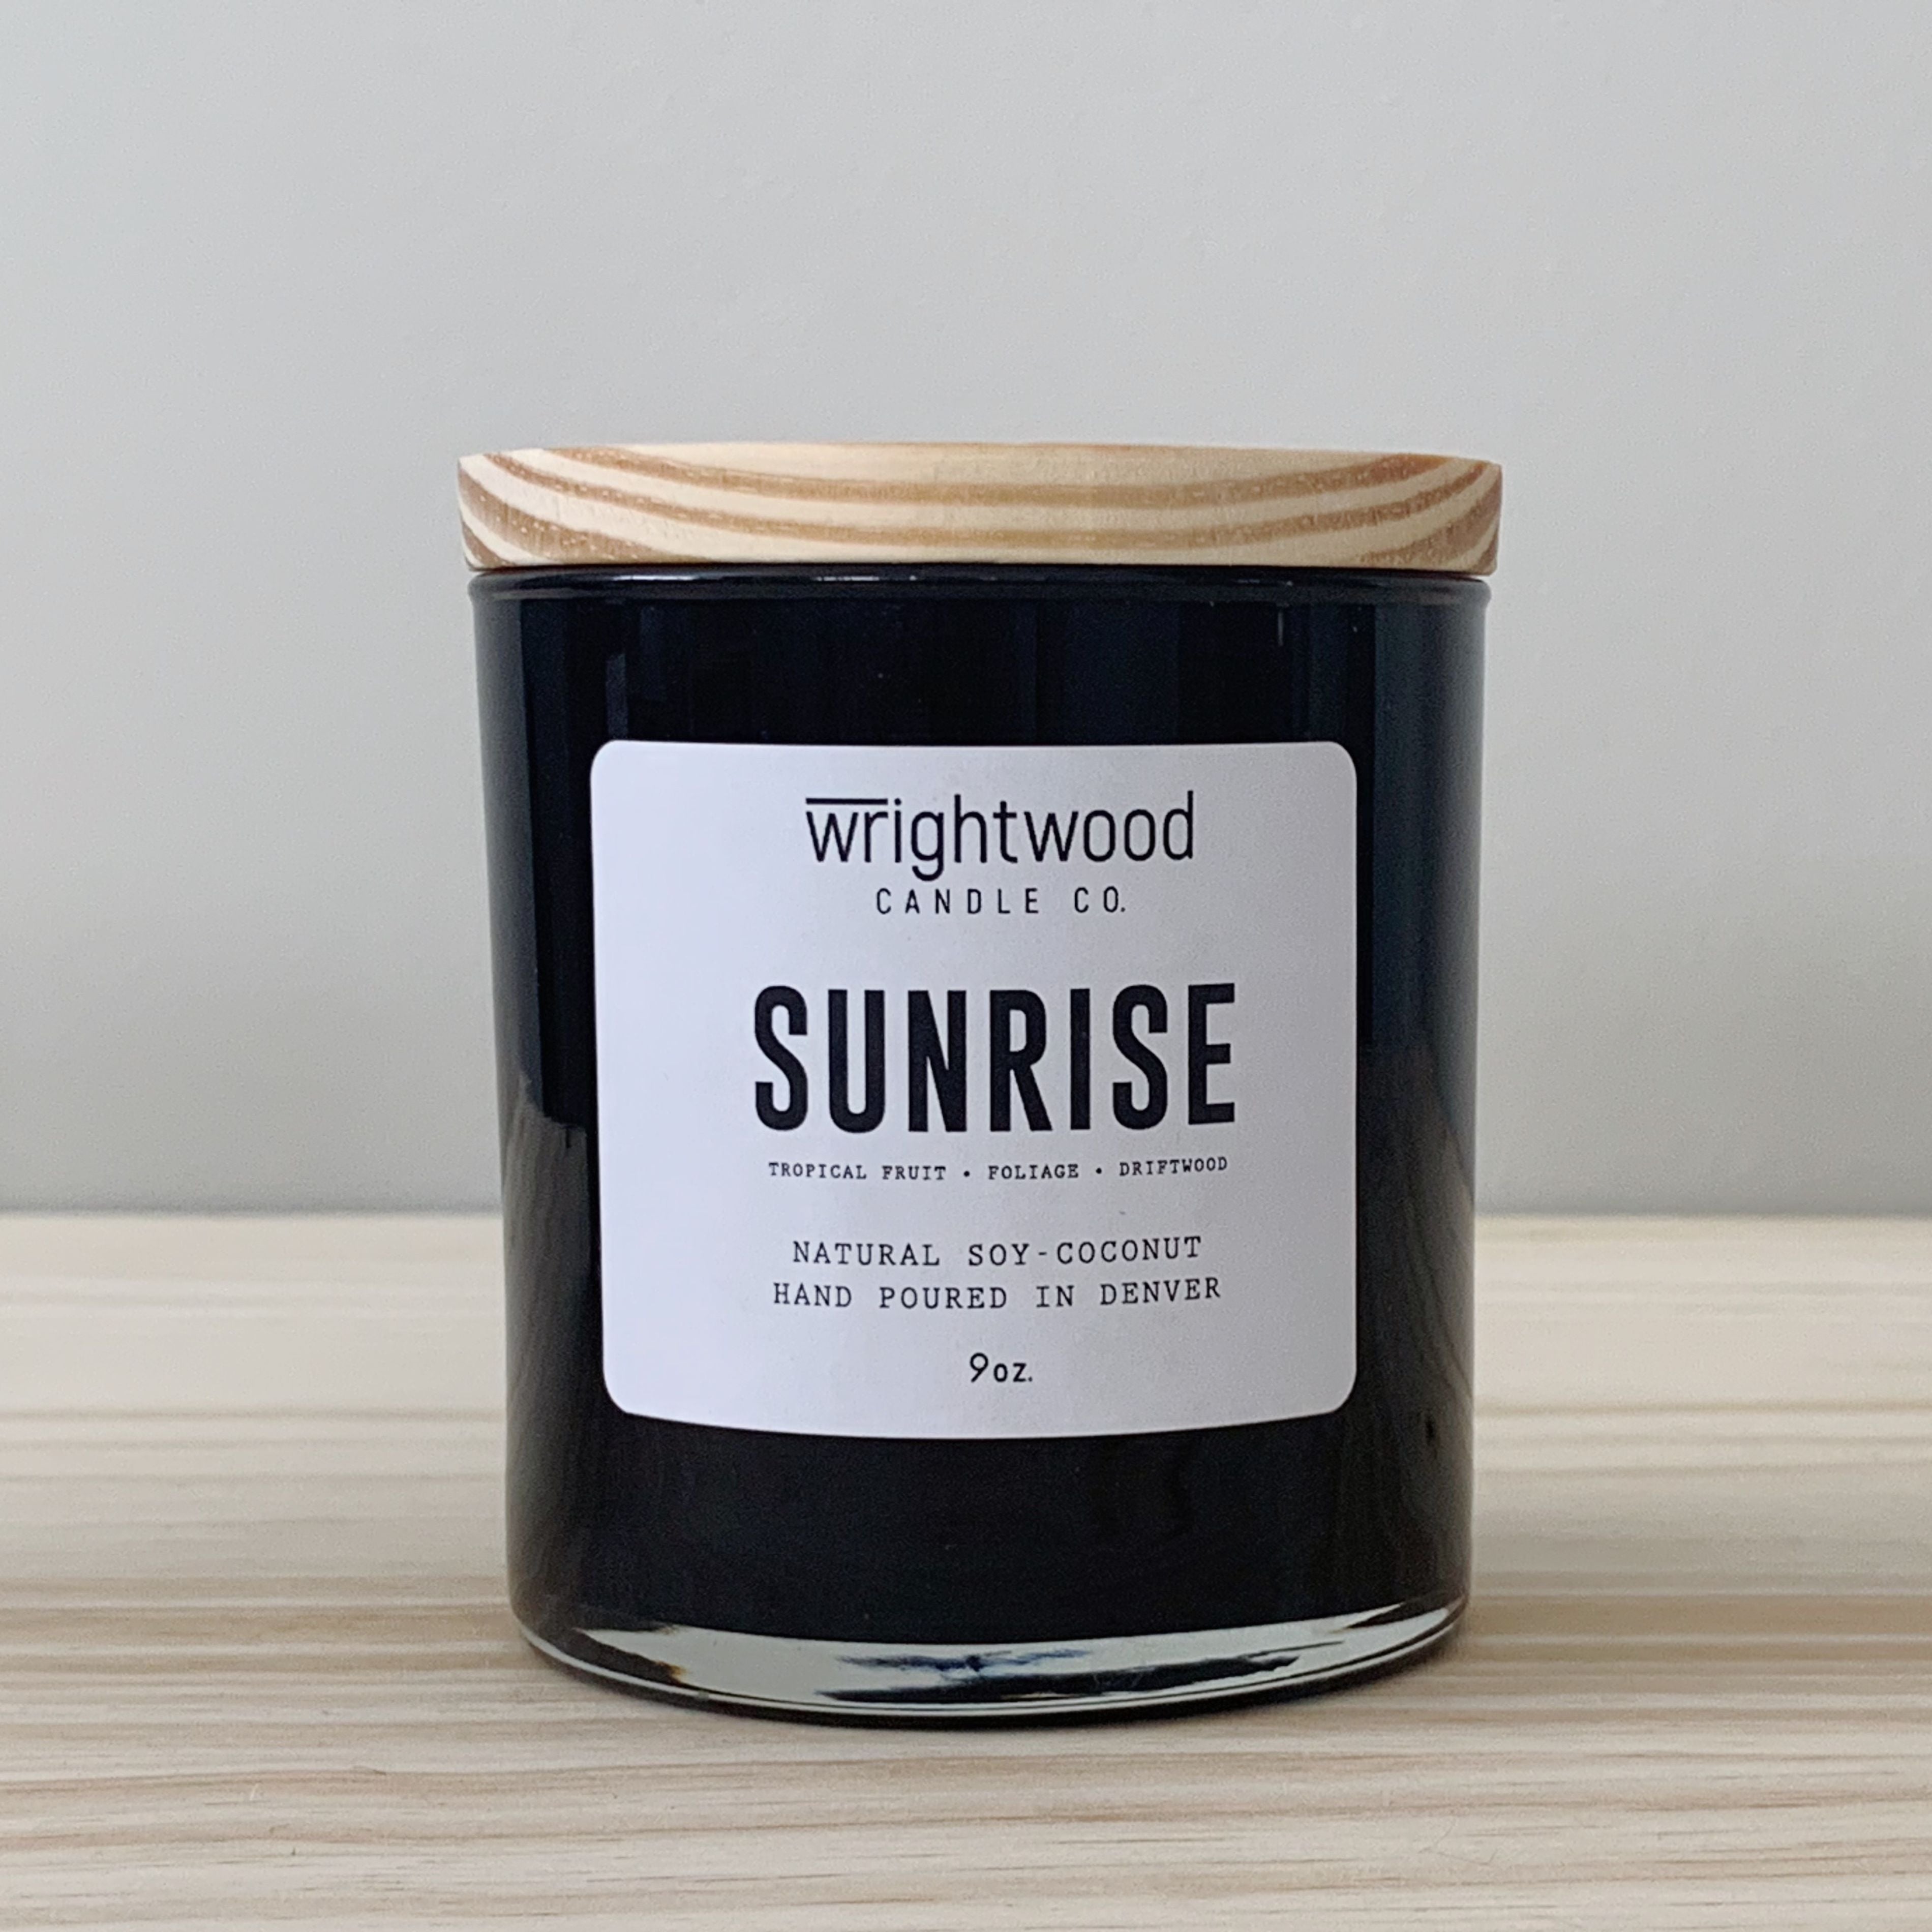 One black candle jar is sitting on top of a wood table with a neutral colored background. The candle has a wood lid and white label. The label has the scent name and company name visible. 